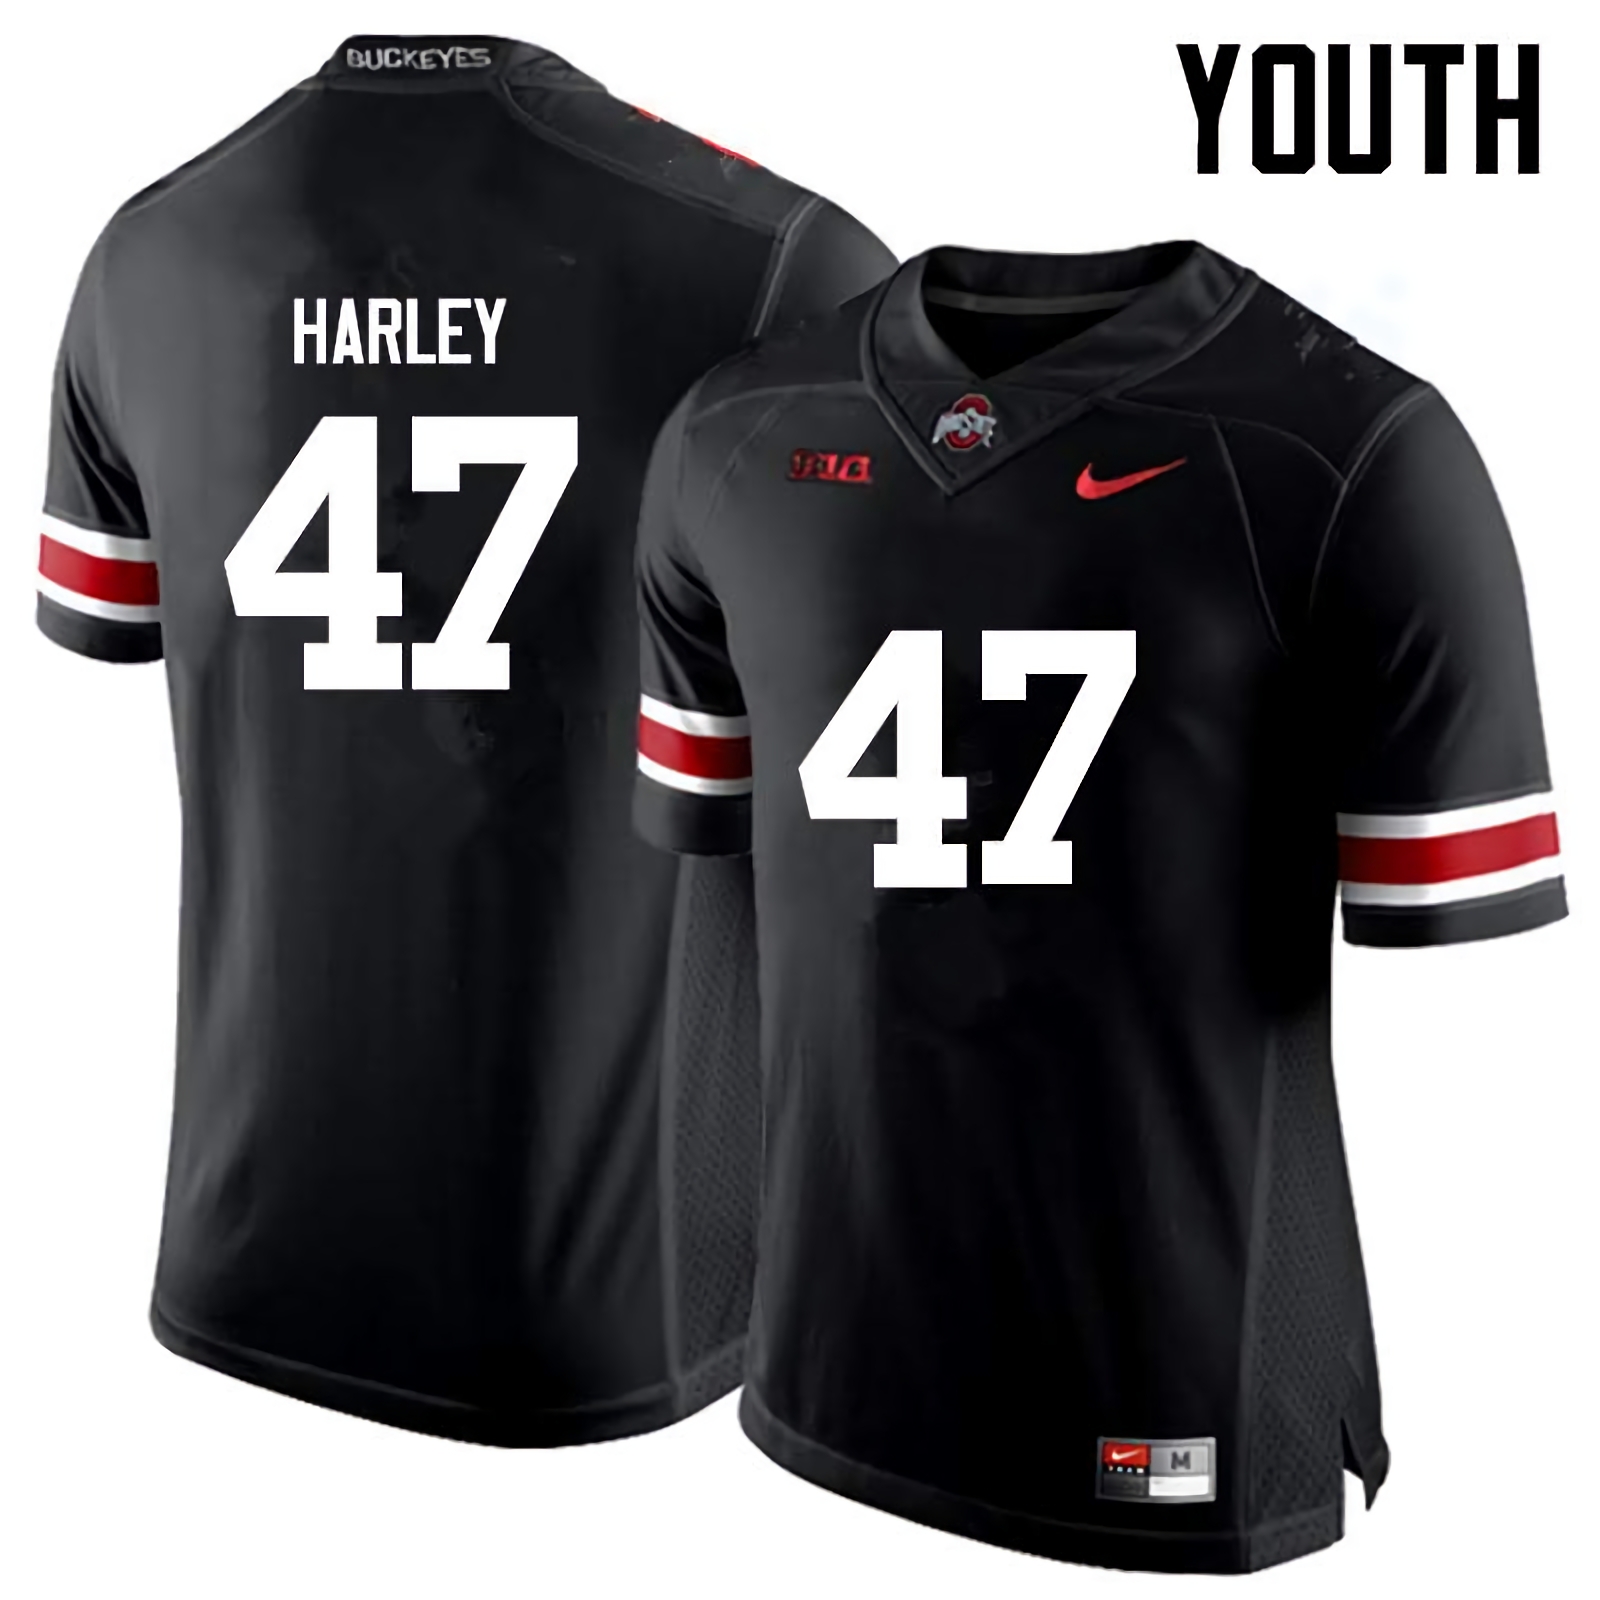 Chic Harley Ohio State Buckeyes Youth NCAA #47 Nike Black College Stitched Football Jersey XLP4256UD